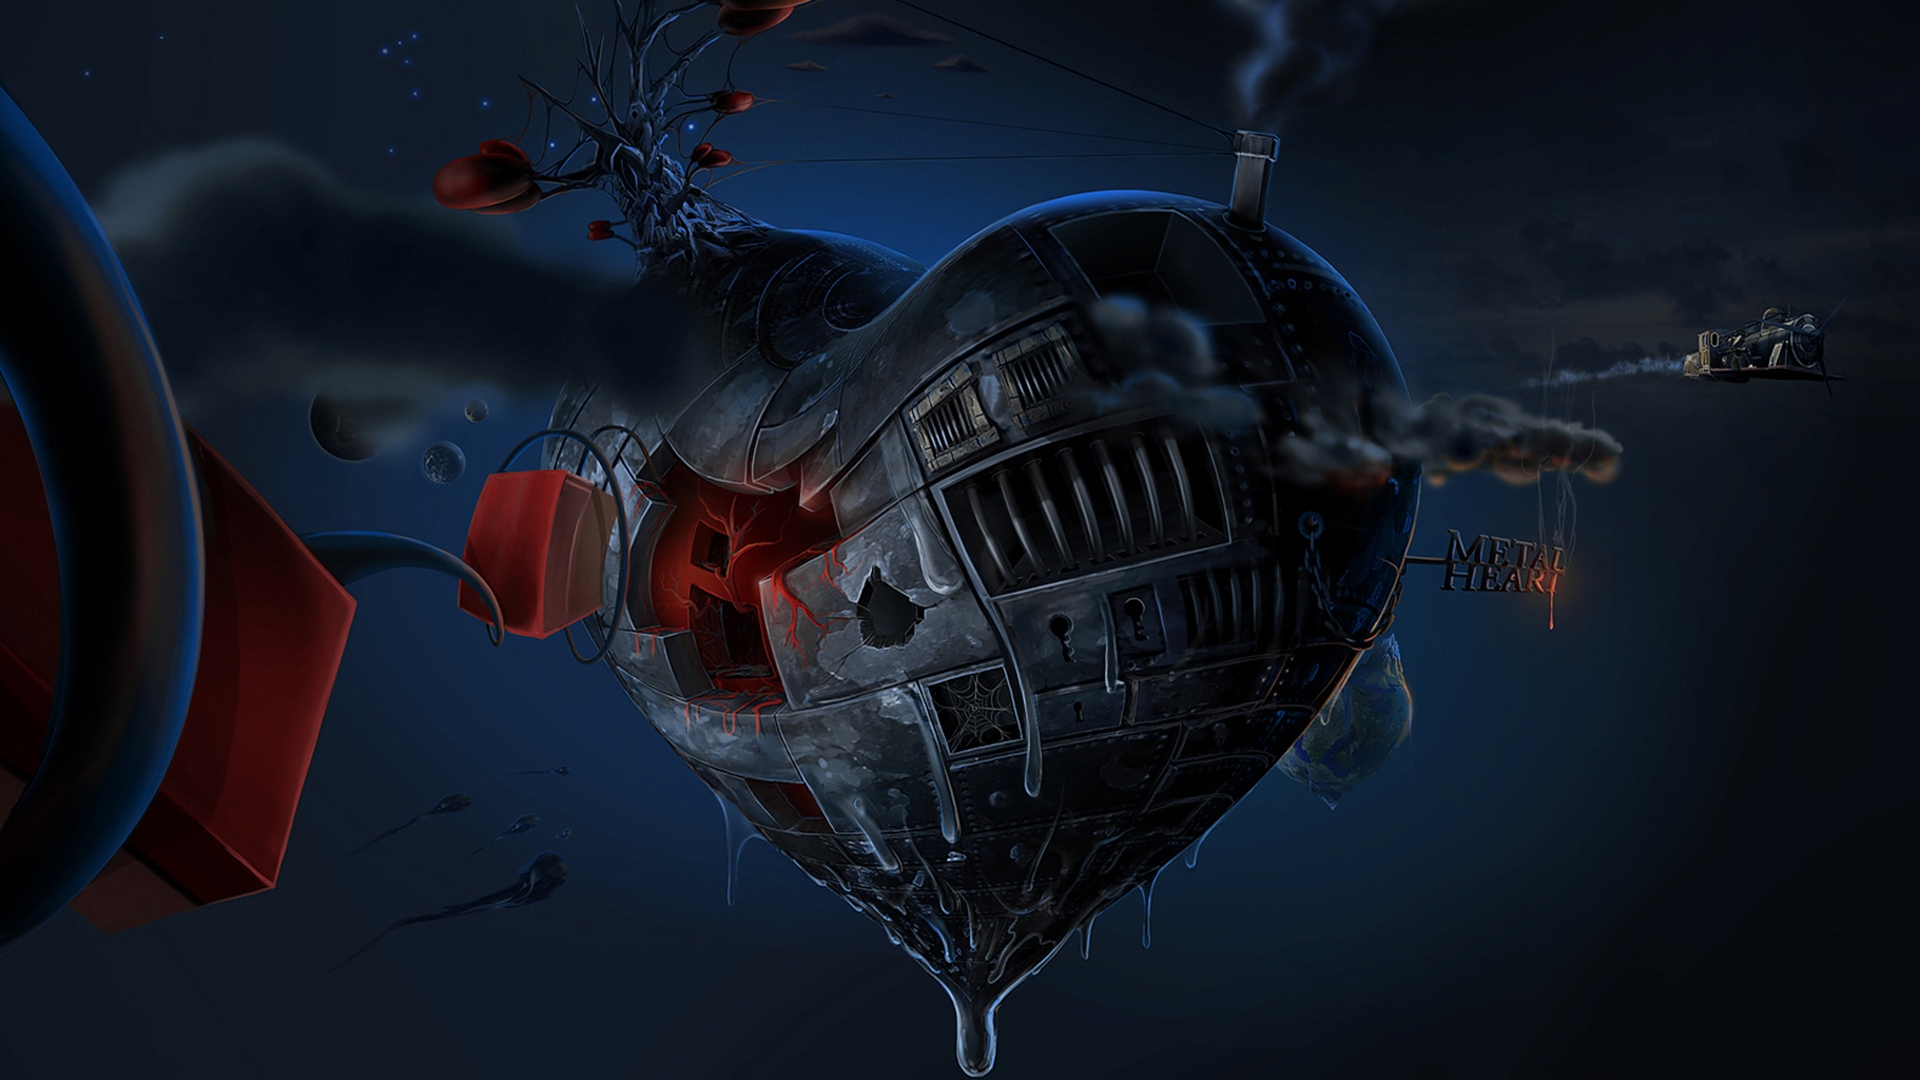 Metal Heart for 1920 x 1080 HDTV 1080p resolution